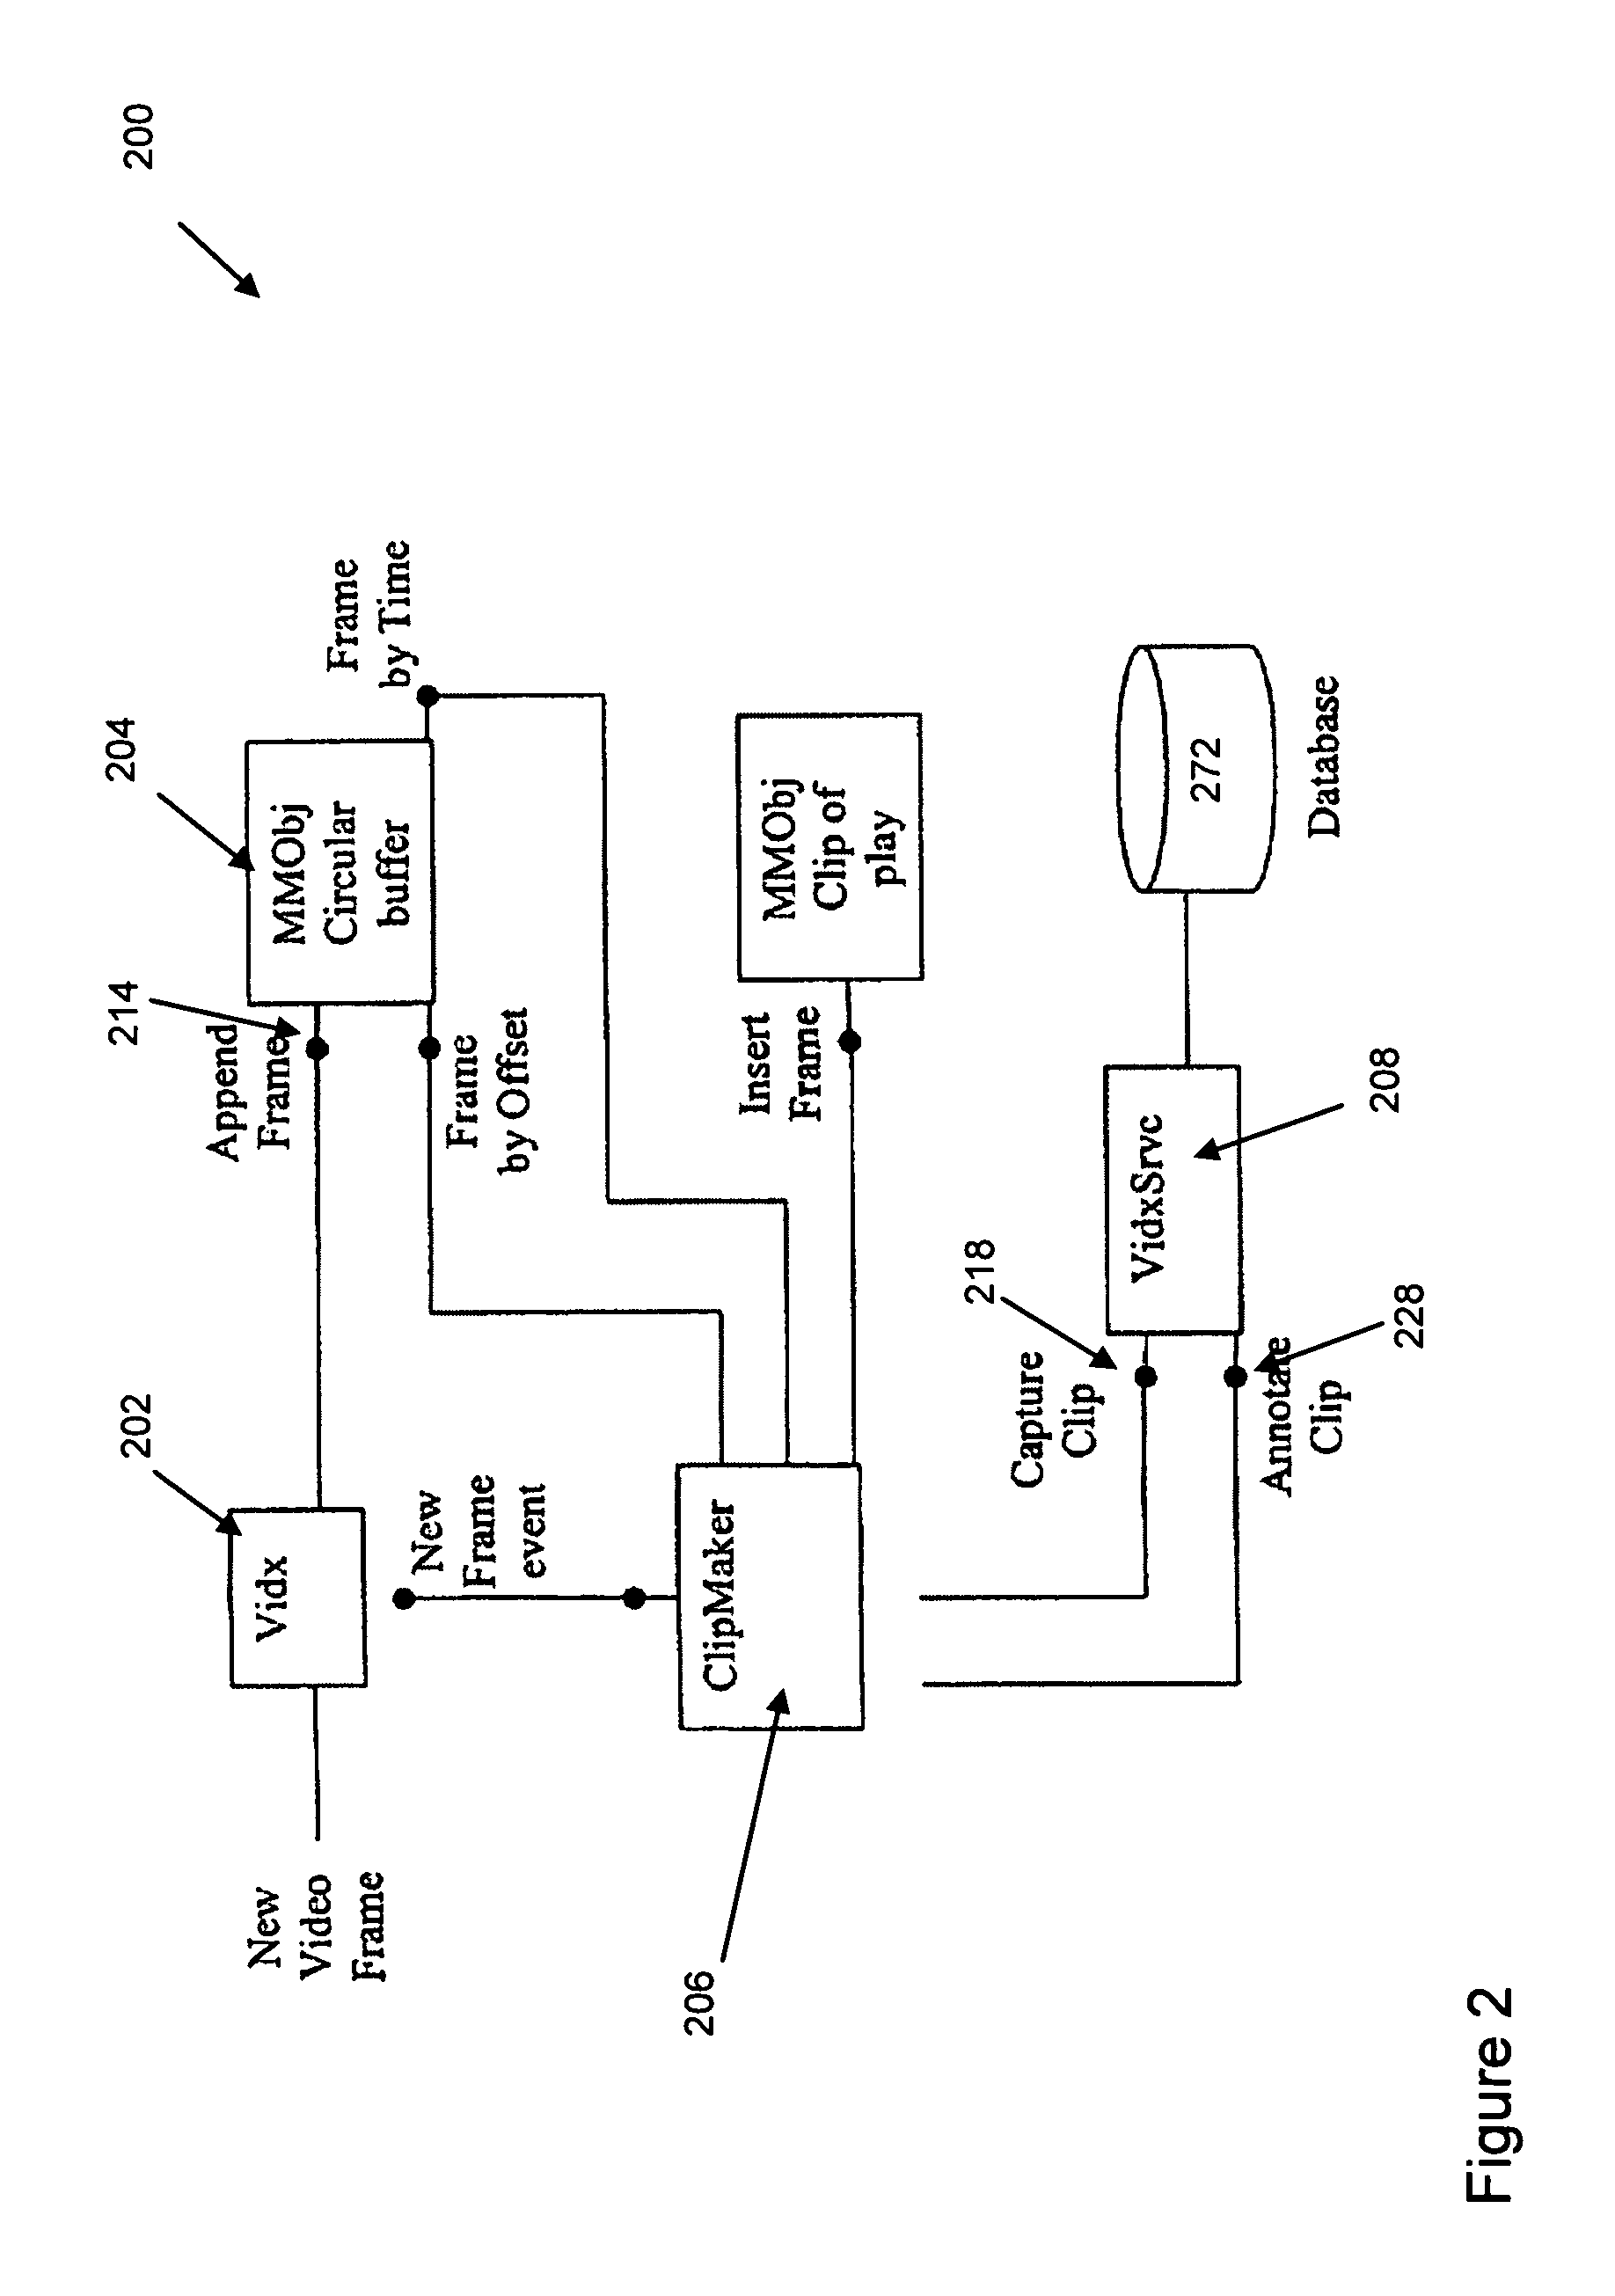 System and method of video capture for sports applications